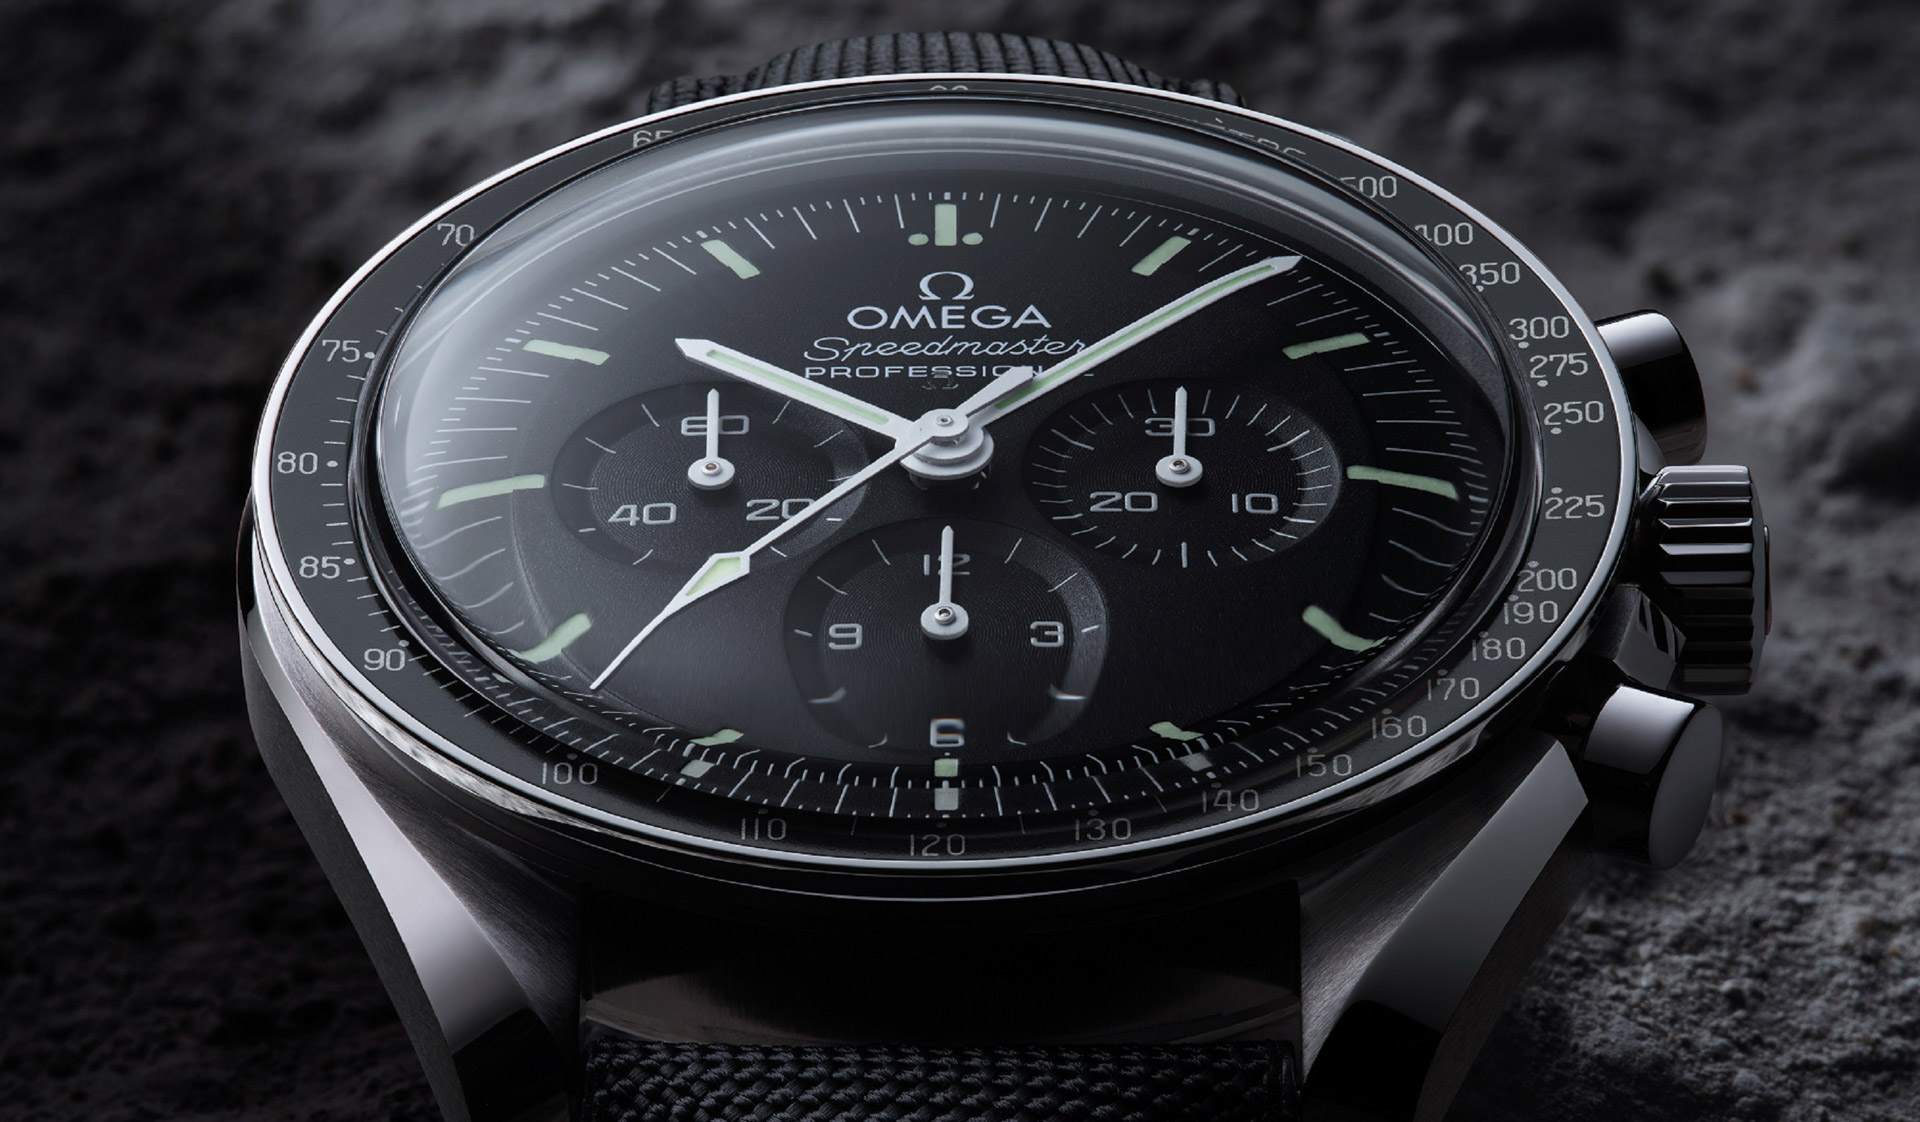 The Next Generation Omega Speedmaster Professional Moonwatch Is Here